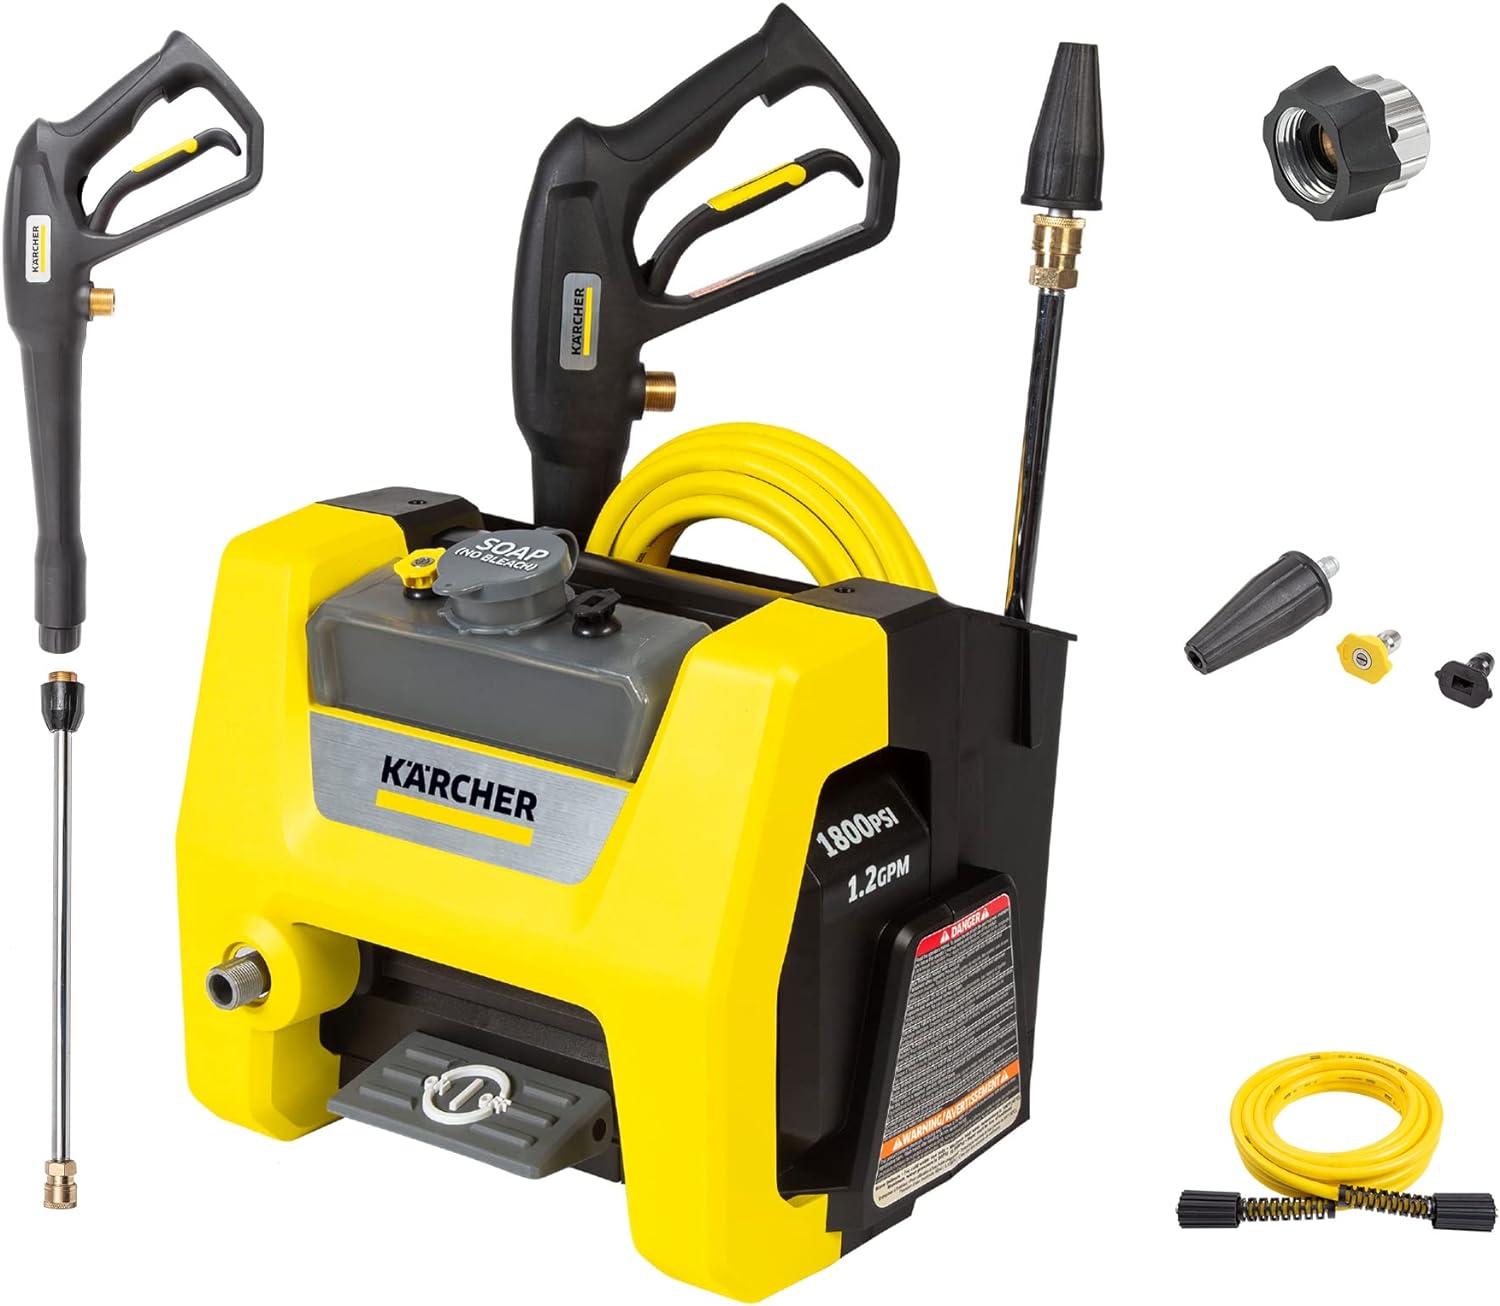 Karcher K1800PS Cube Electric Pressure Washer TruPressure for $82.90 Shipped